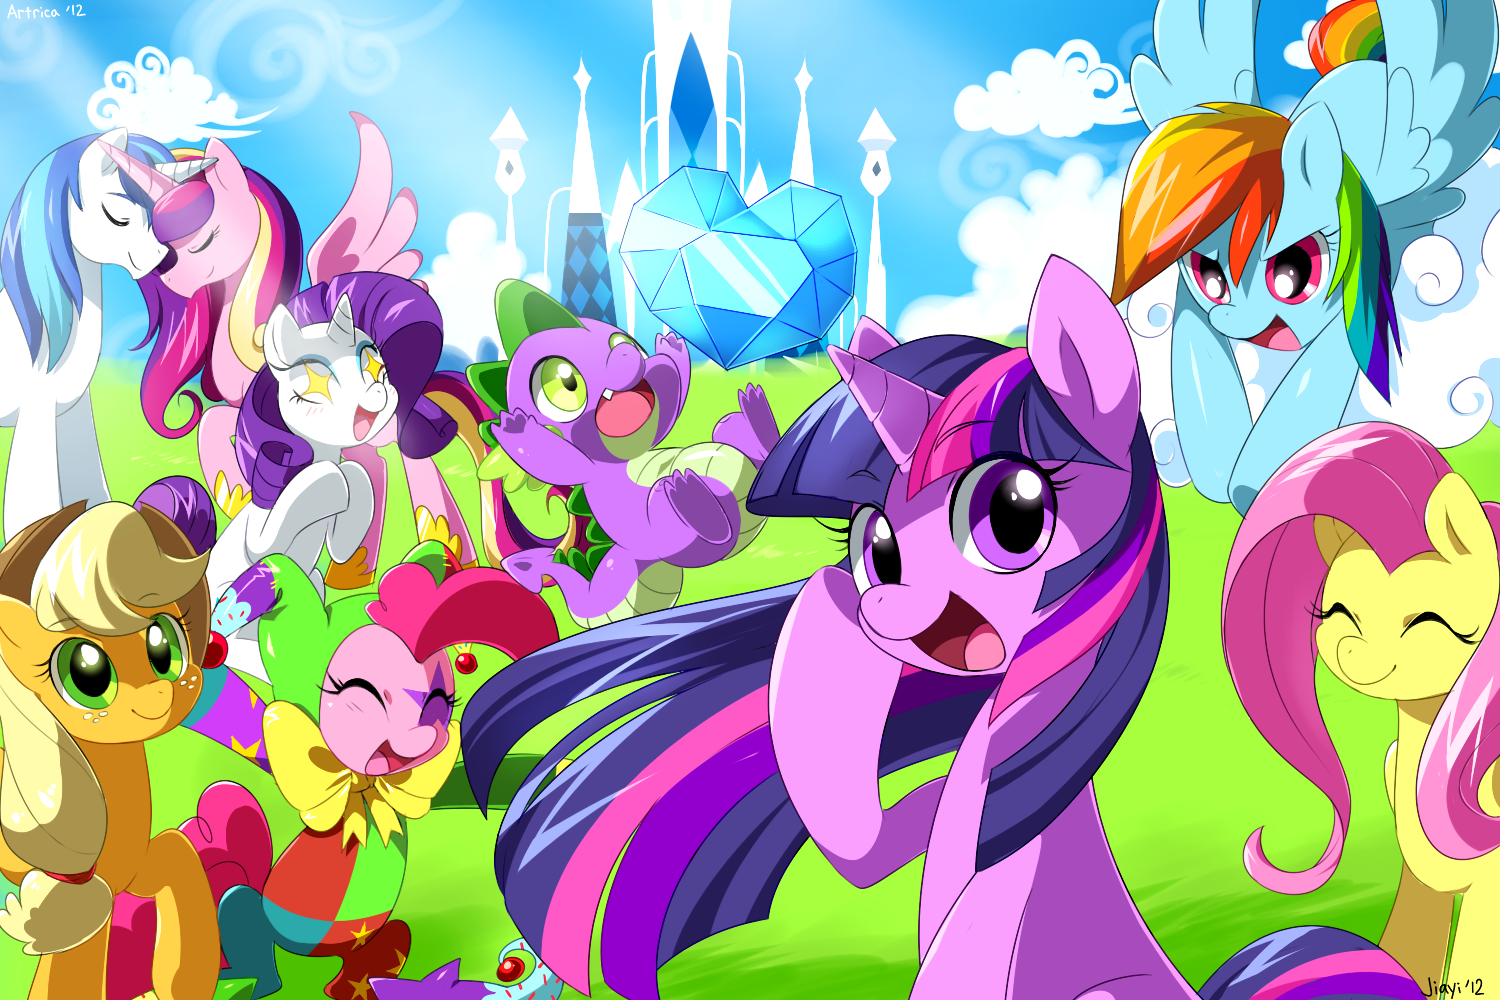 Bronies: The Extremely Unexpected Adult Fans of My Little Pony